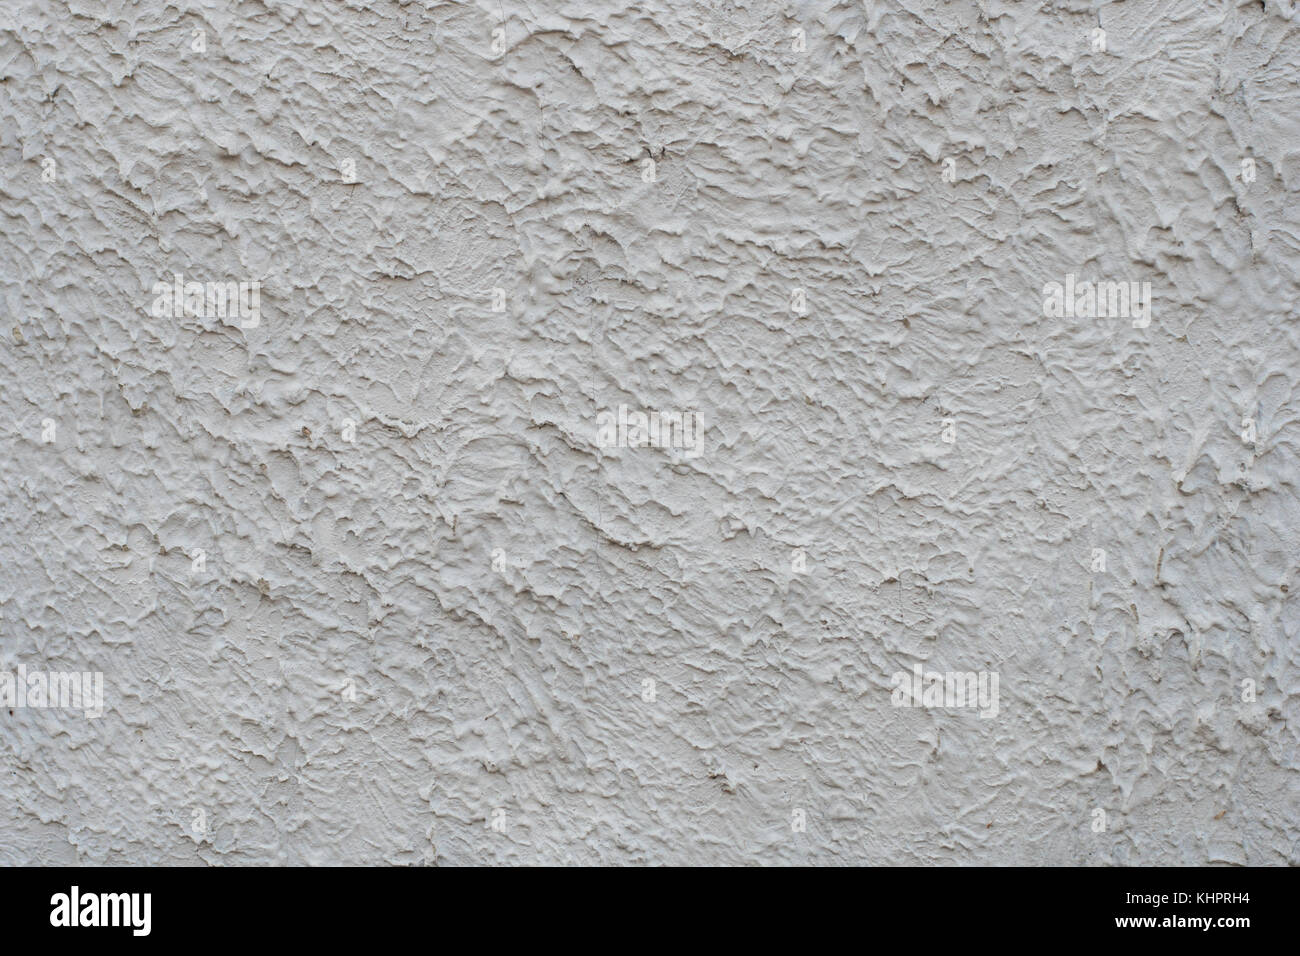 Background of gray cement rough wall, background, design, retro, pattern, vintage, ornament, texture, banner, gray, light, decorative, fashionable, wa Stock Photo